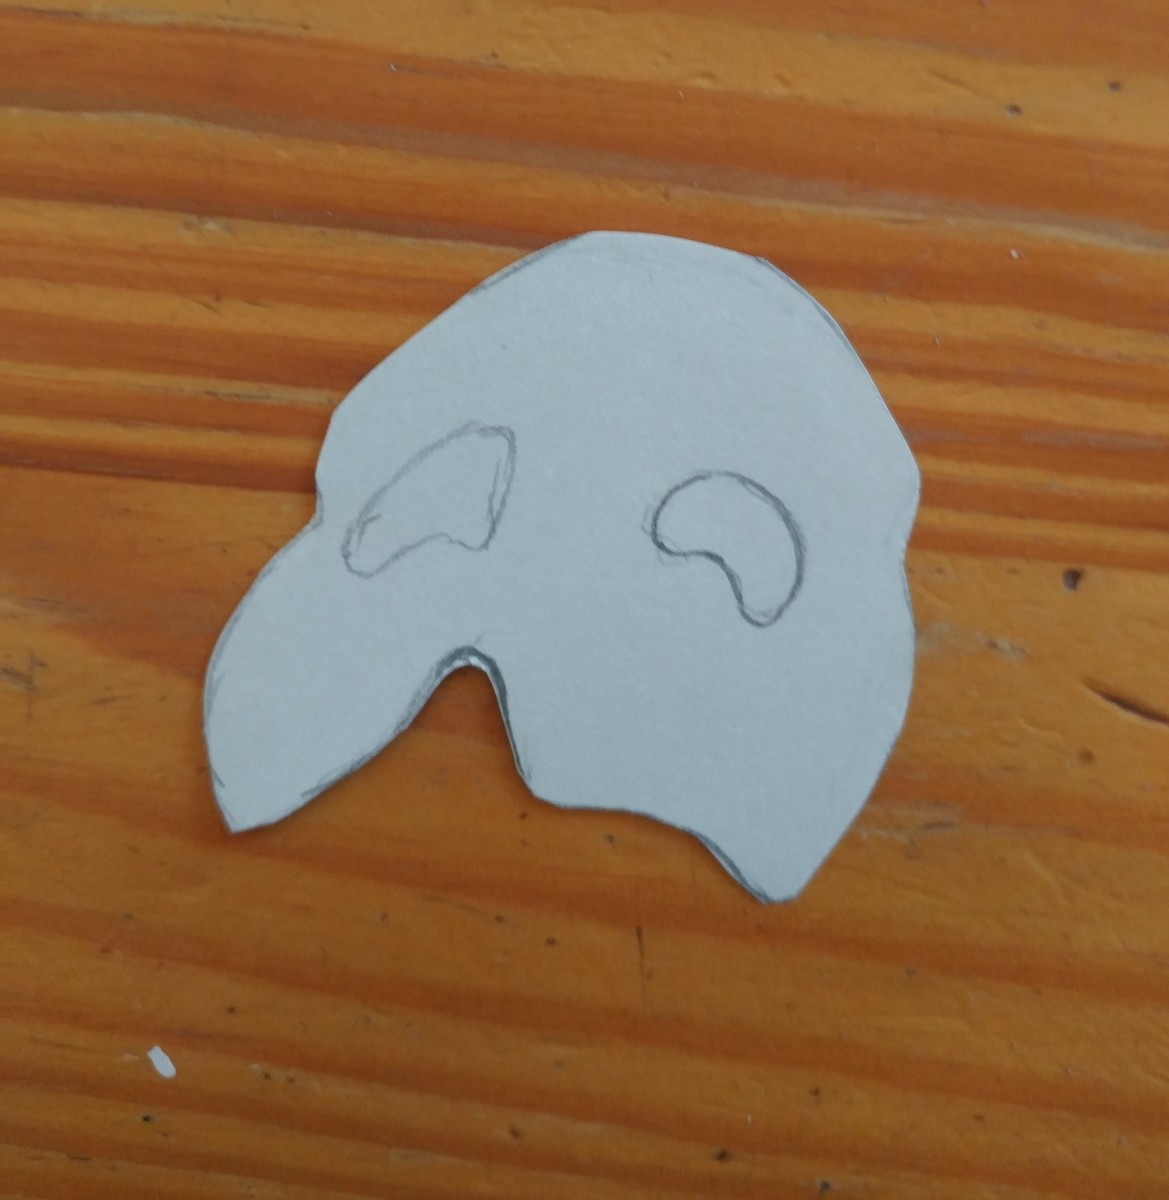 Cut out the shape of the mask out of white cardstock.